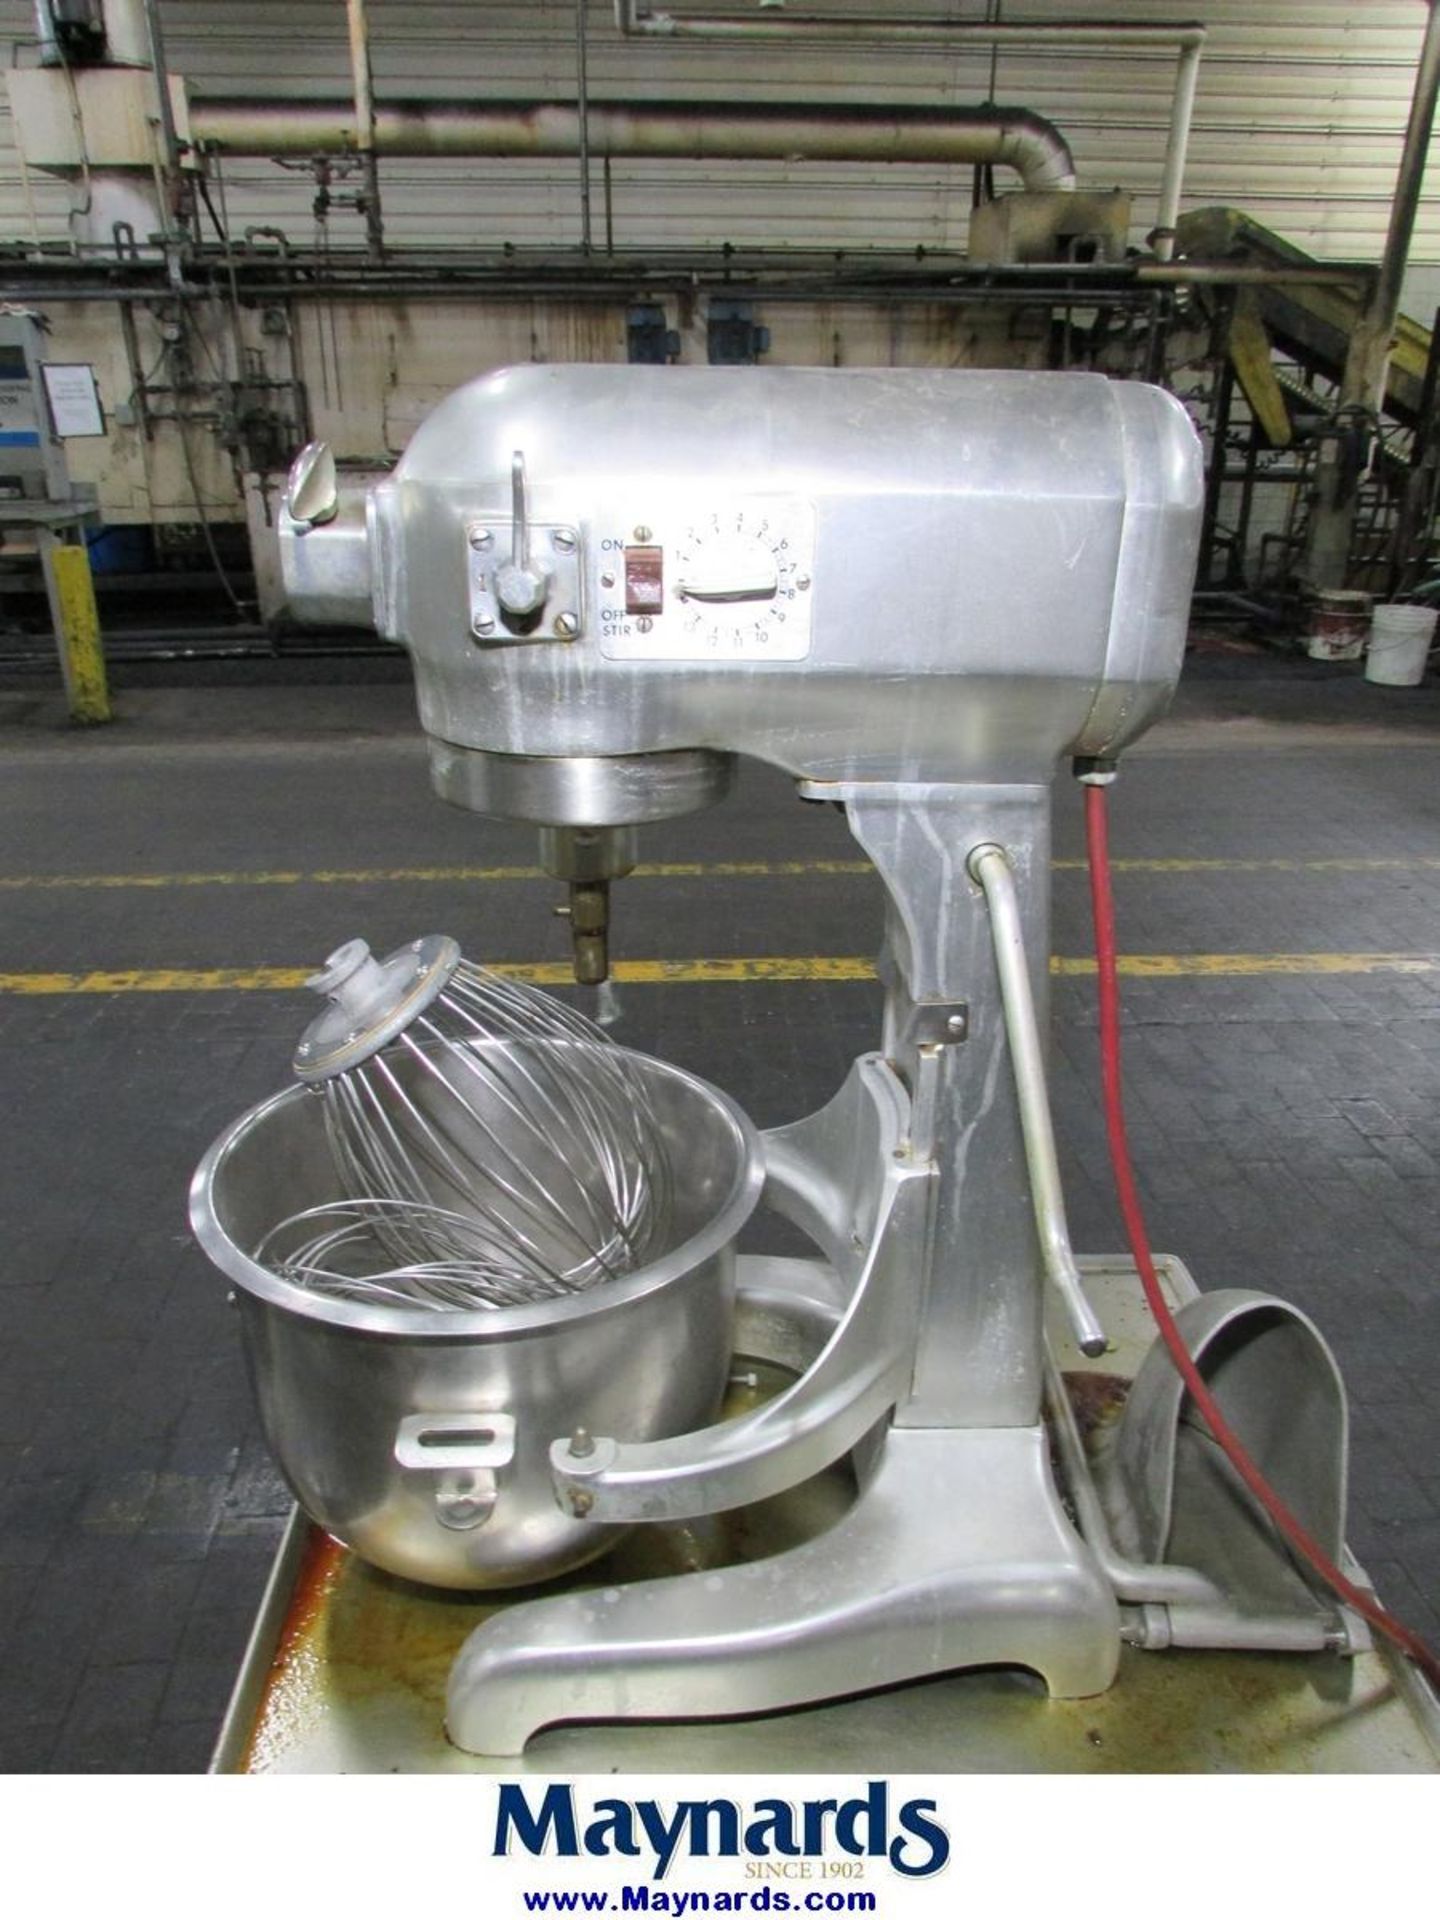 Hobart AS-200-DT Stainless Steel Commercial Mixer - Image 3 of 4